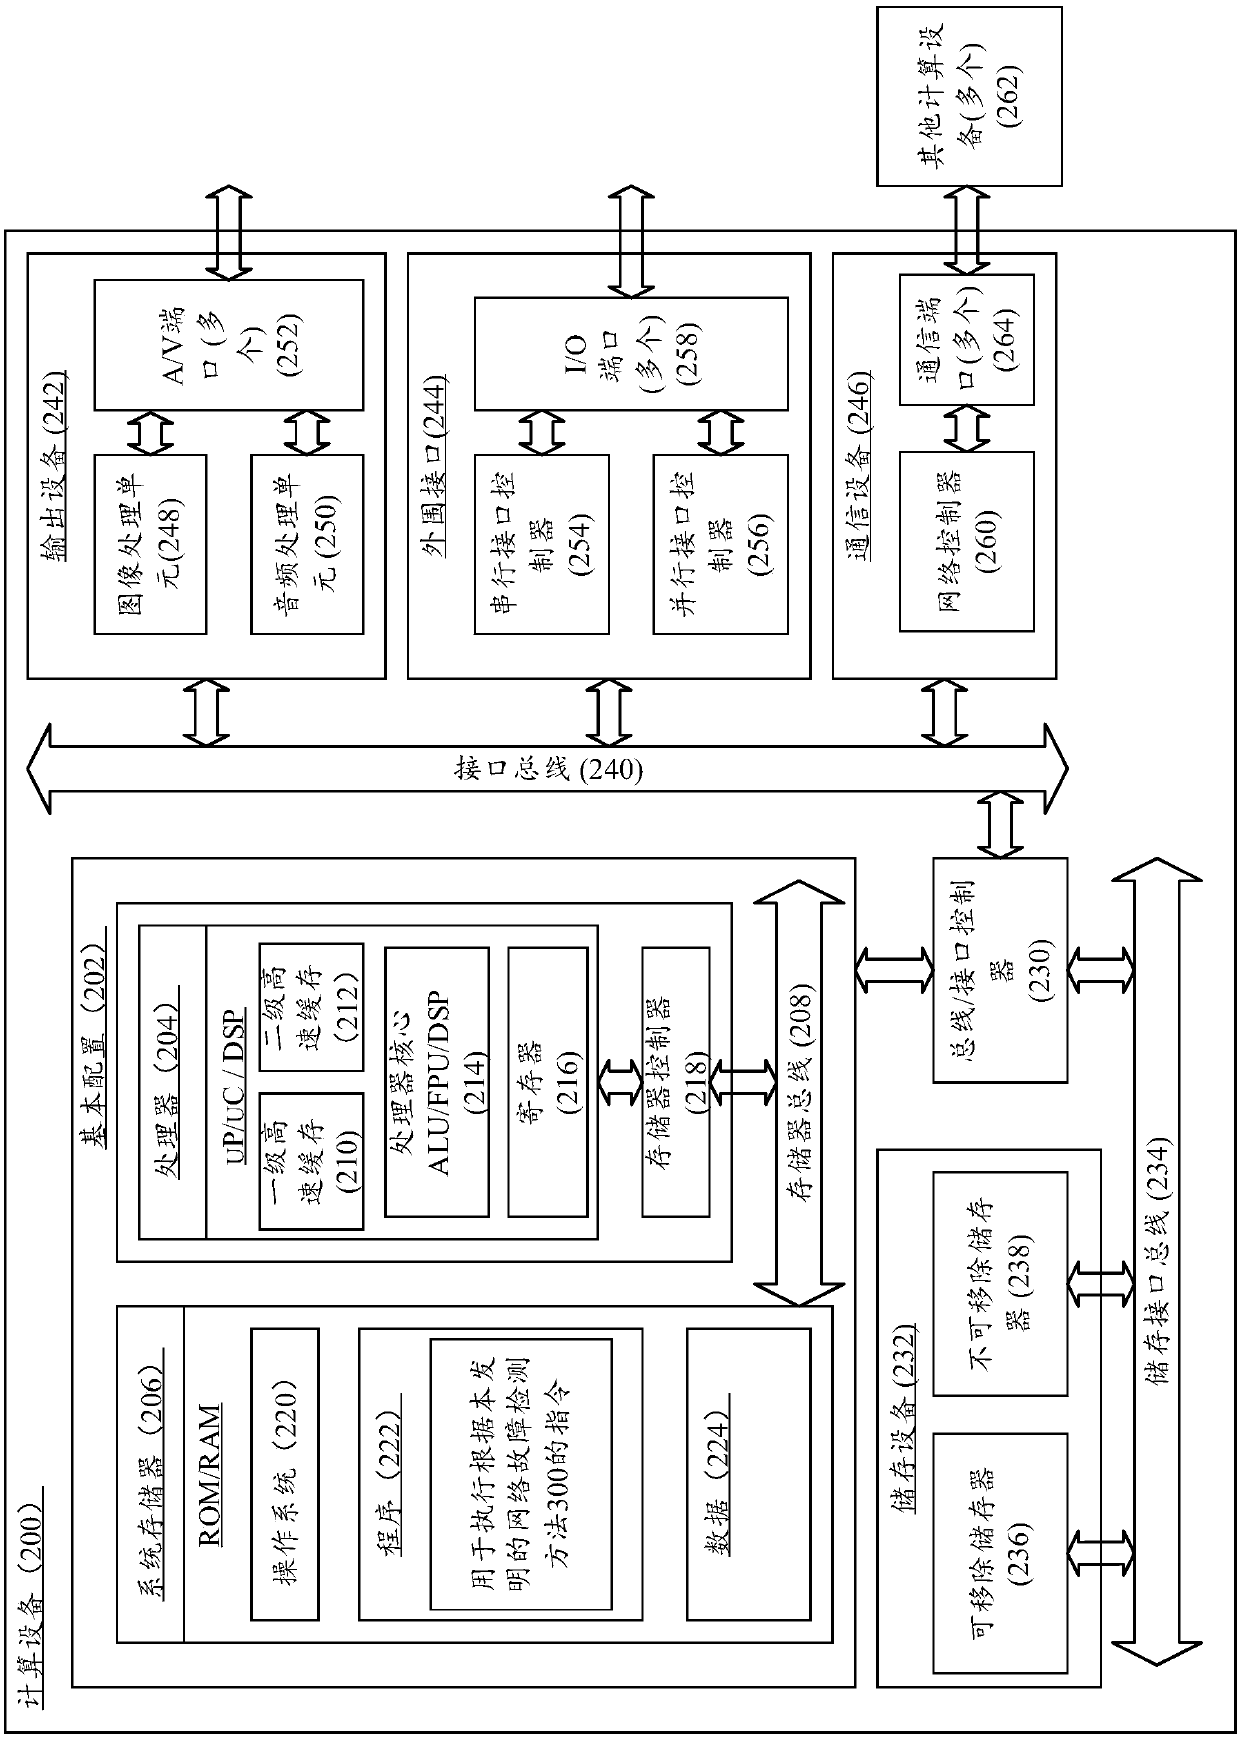 Network fault detection method and system